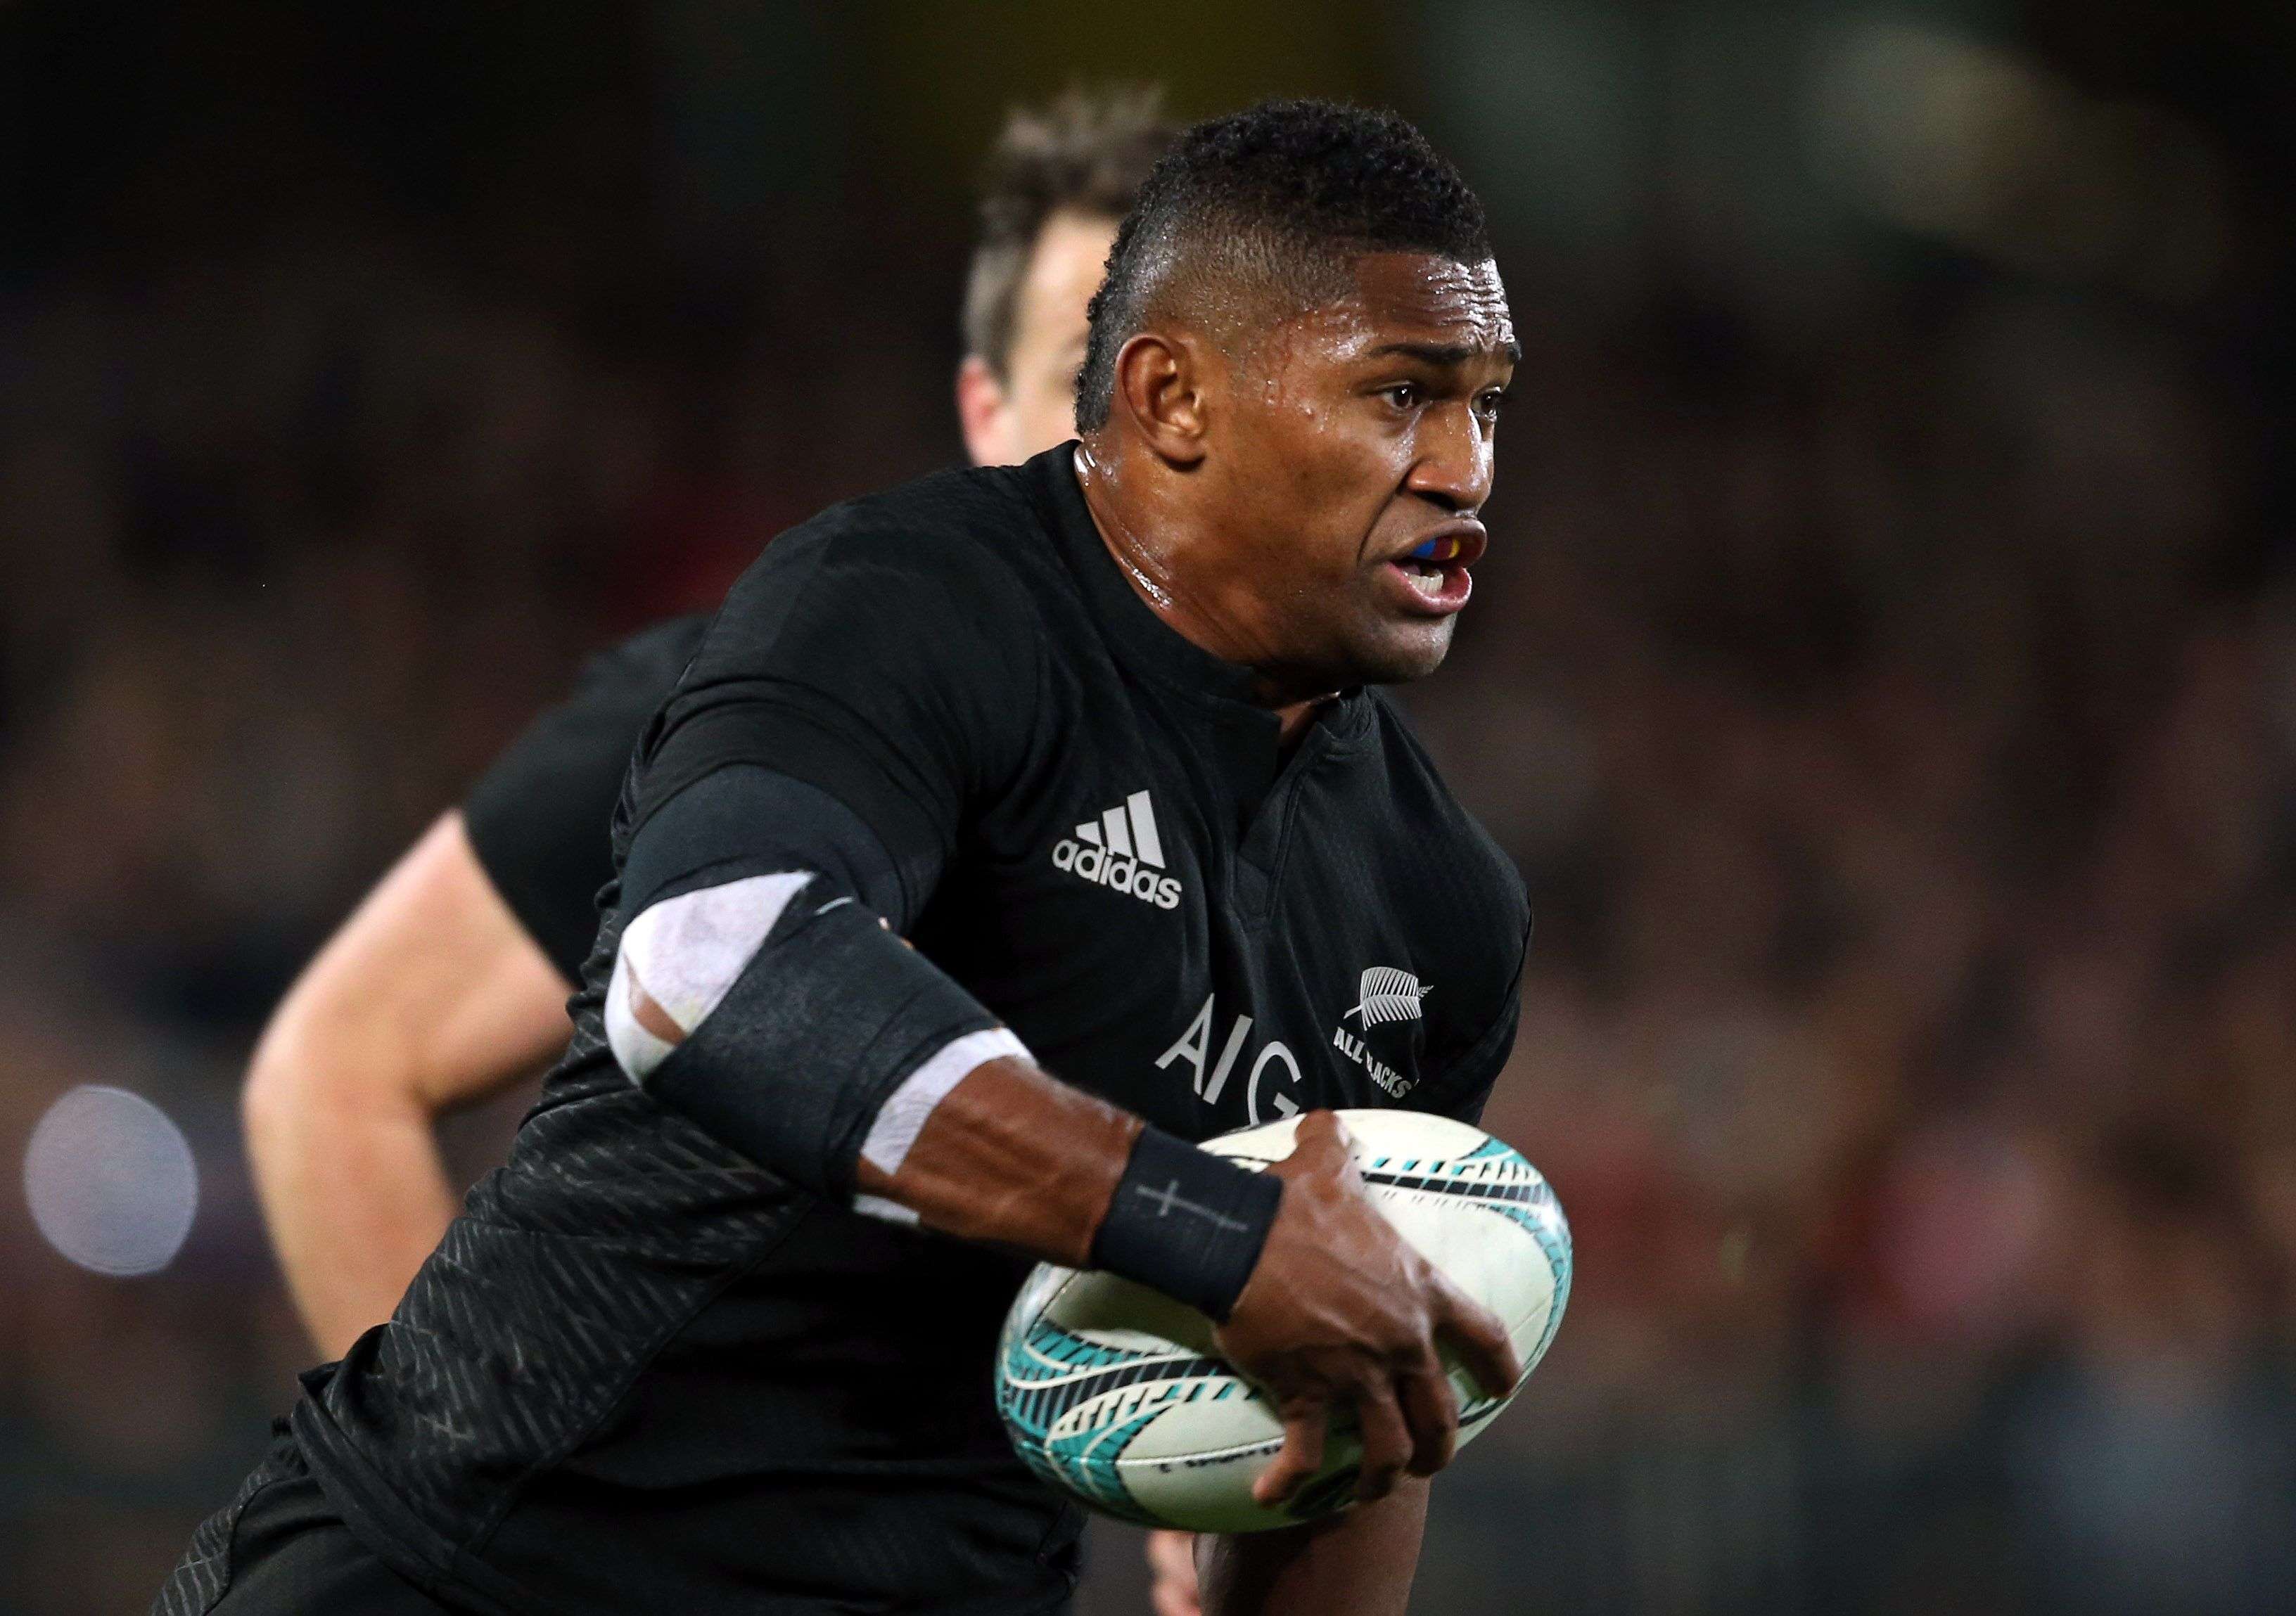 Waisake Naholo in action against Wales at Eden Park in Auckland in June 2016. Photo: AFP